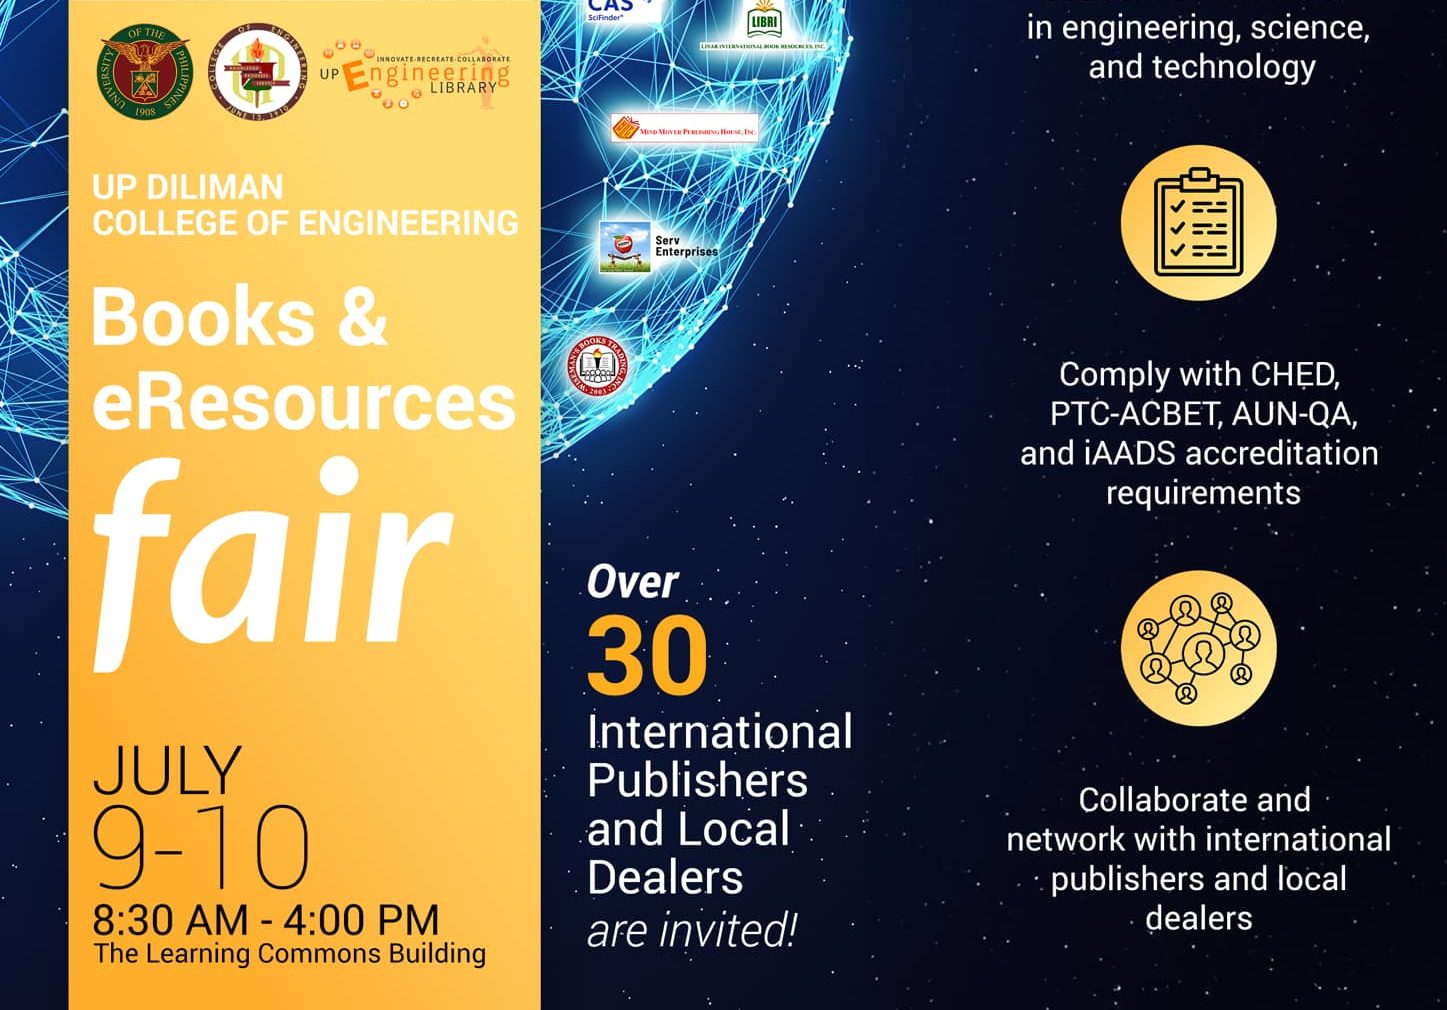 UPD COE Book and Electronic Resources Fair